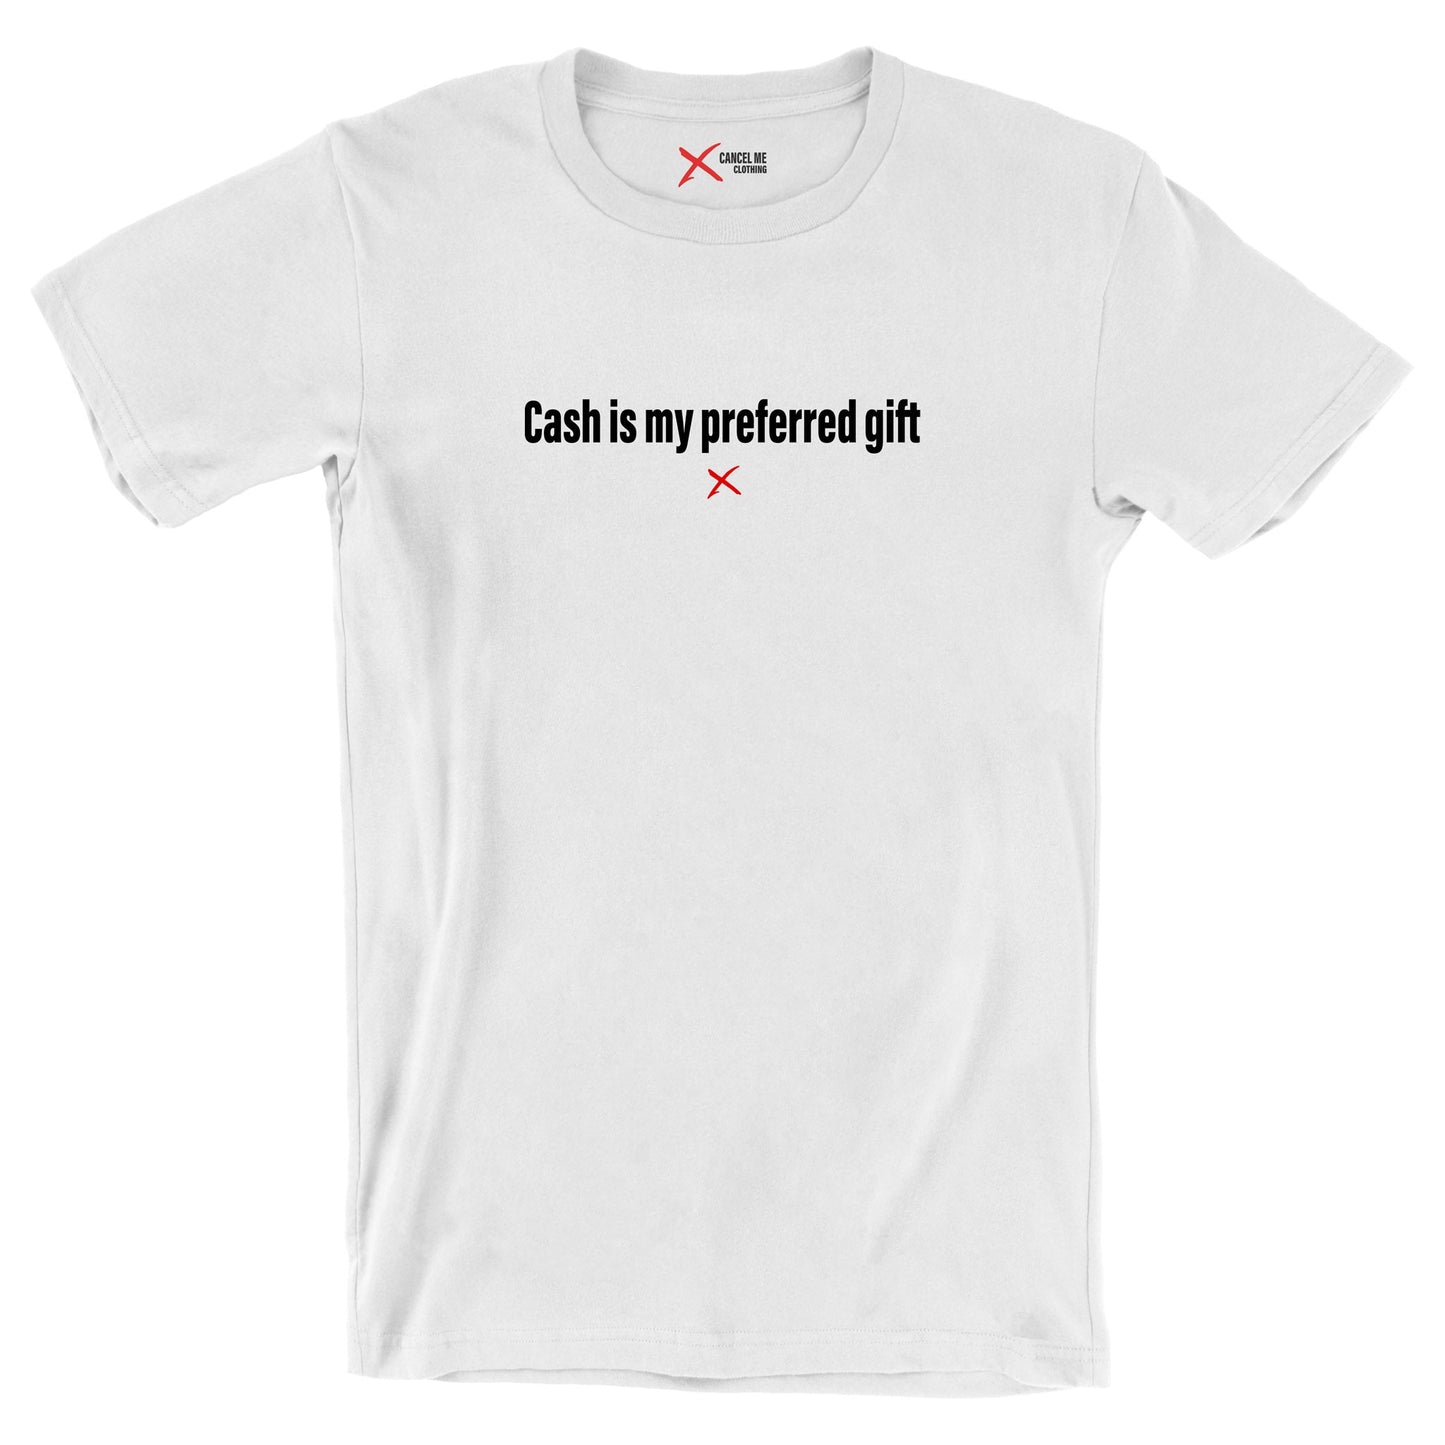 Cash is my preferred gift - Shirt